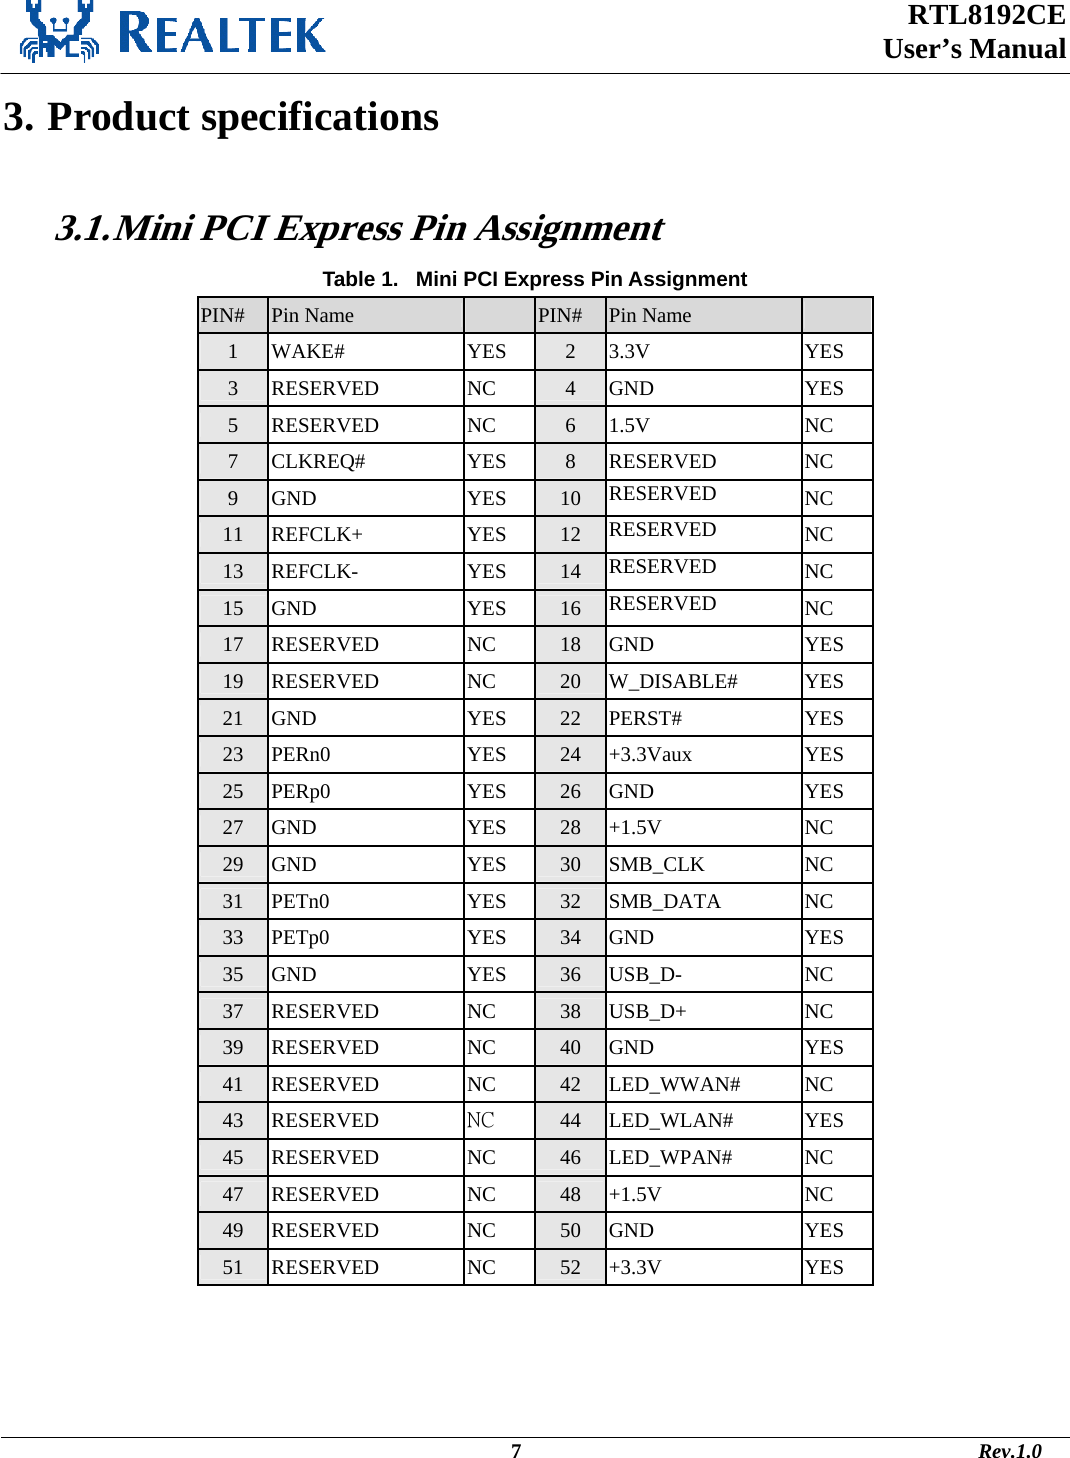  RTL8192CE  User’s Manual    3. Product specifications  3.1. Mini PCI Express Pin Assignment Table 1.   Mini PCI Express Pin Assignment PIN# Pin Name    PIN# Pin Name   1 WAKE# YES 2 3.3V YES 3 RESERVED NC 4 GND YES 5 RESERVED NC 6 1.5V NC 7 CLKREQ# YES 8 RESERVED NC 9 GND YES 10 RESERVED  NC 11 REFCLK+ YES 12 RESERVED  NC 13 REFCLK- YES 14 RESERVED  NC 15 GND YES 16 RESERVED  NC 17 RESERVED NC 18 GND YES 19 RESERVED NC 20 W_DISABLE# YES 21 GND YES 22 PERST# YES 23 PERn0 YES 24 +3.3Vaux YES 25 PERp0 YES 26 GND YES 27 GND YES 28 +1.5V NC 29 GND YES 30 SMB_CLK NC 31 PETn0 YES 32 SMB_DATA NC 33 PETp0 YES 34 GND YES 35 GND YES 36 USB_D- NC 37 RESERVED NC 38 USB_D+ NC 39 RESERVED NC 40 GND YES 41 RESERVED NC 42 LED_WWAN# NC 43 RESERVED NC  44 LED_WLAN# YES 45 RESERVED NC 46 LED_WPAN# NC 47 RESERVED NC 48 +1.5V NC 49 RESERVED NC 50 GND YES 51 RESERVED NC 52 +3.3V YES                                                                                              7                                                                                       Rev.1.0 